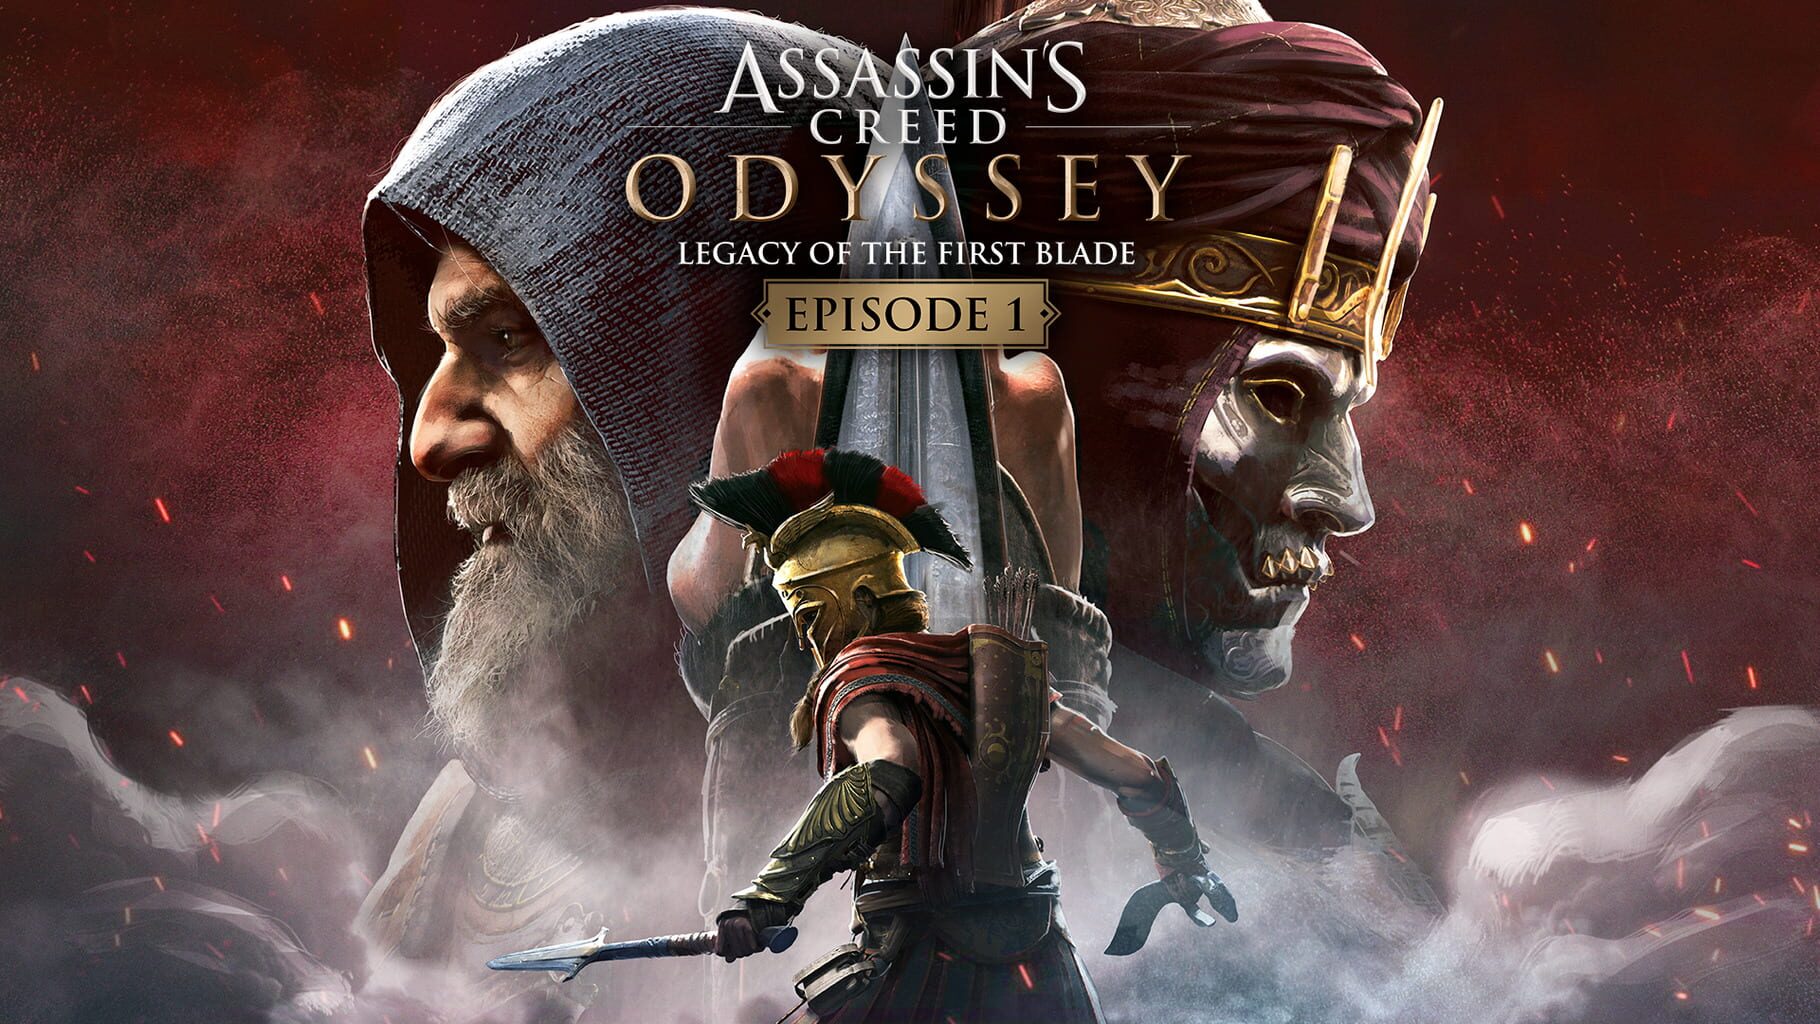 Arte - Assassin's Creed Odyssey: Legacy of the First Blade